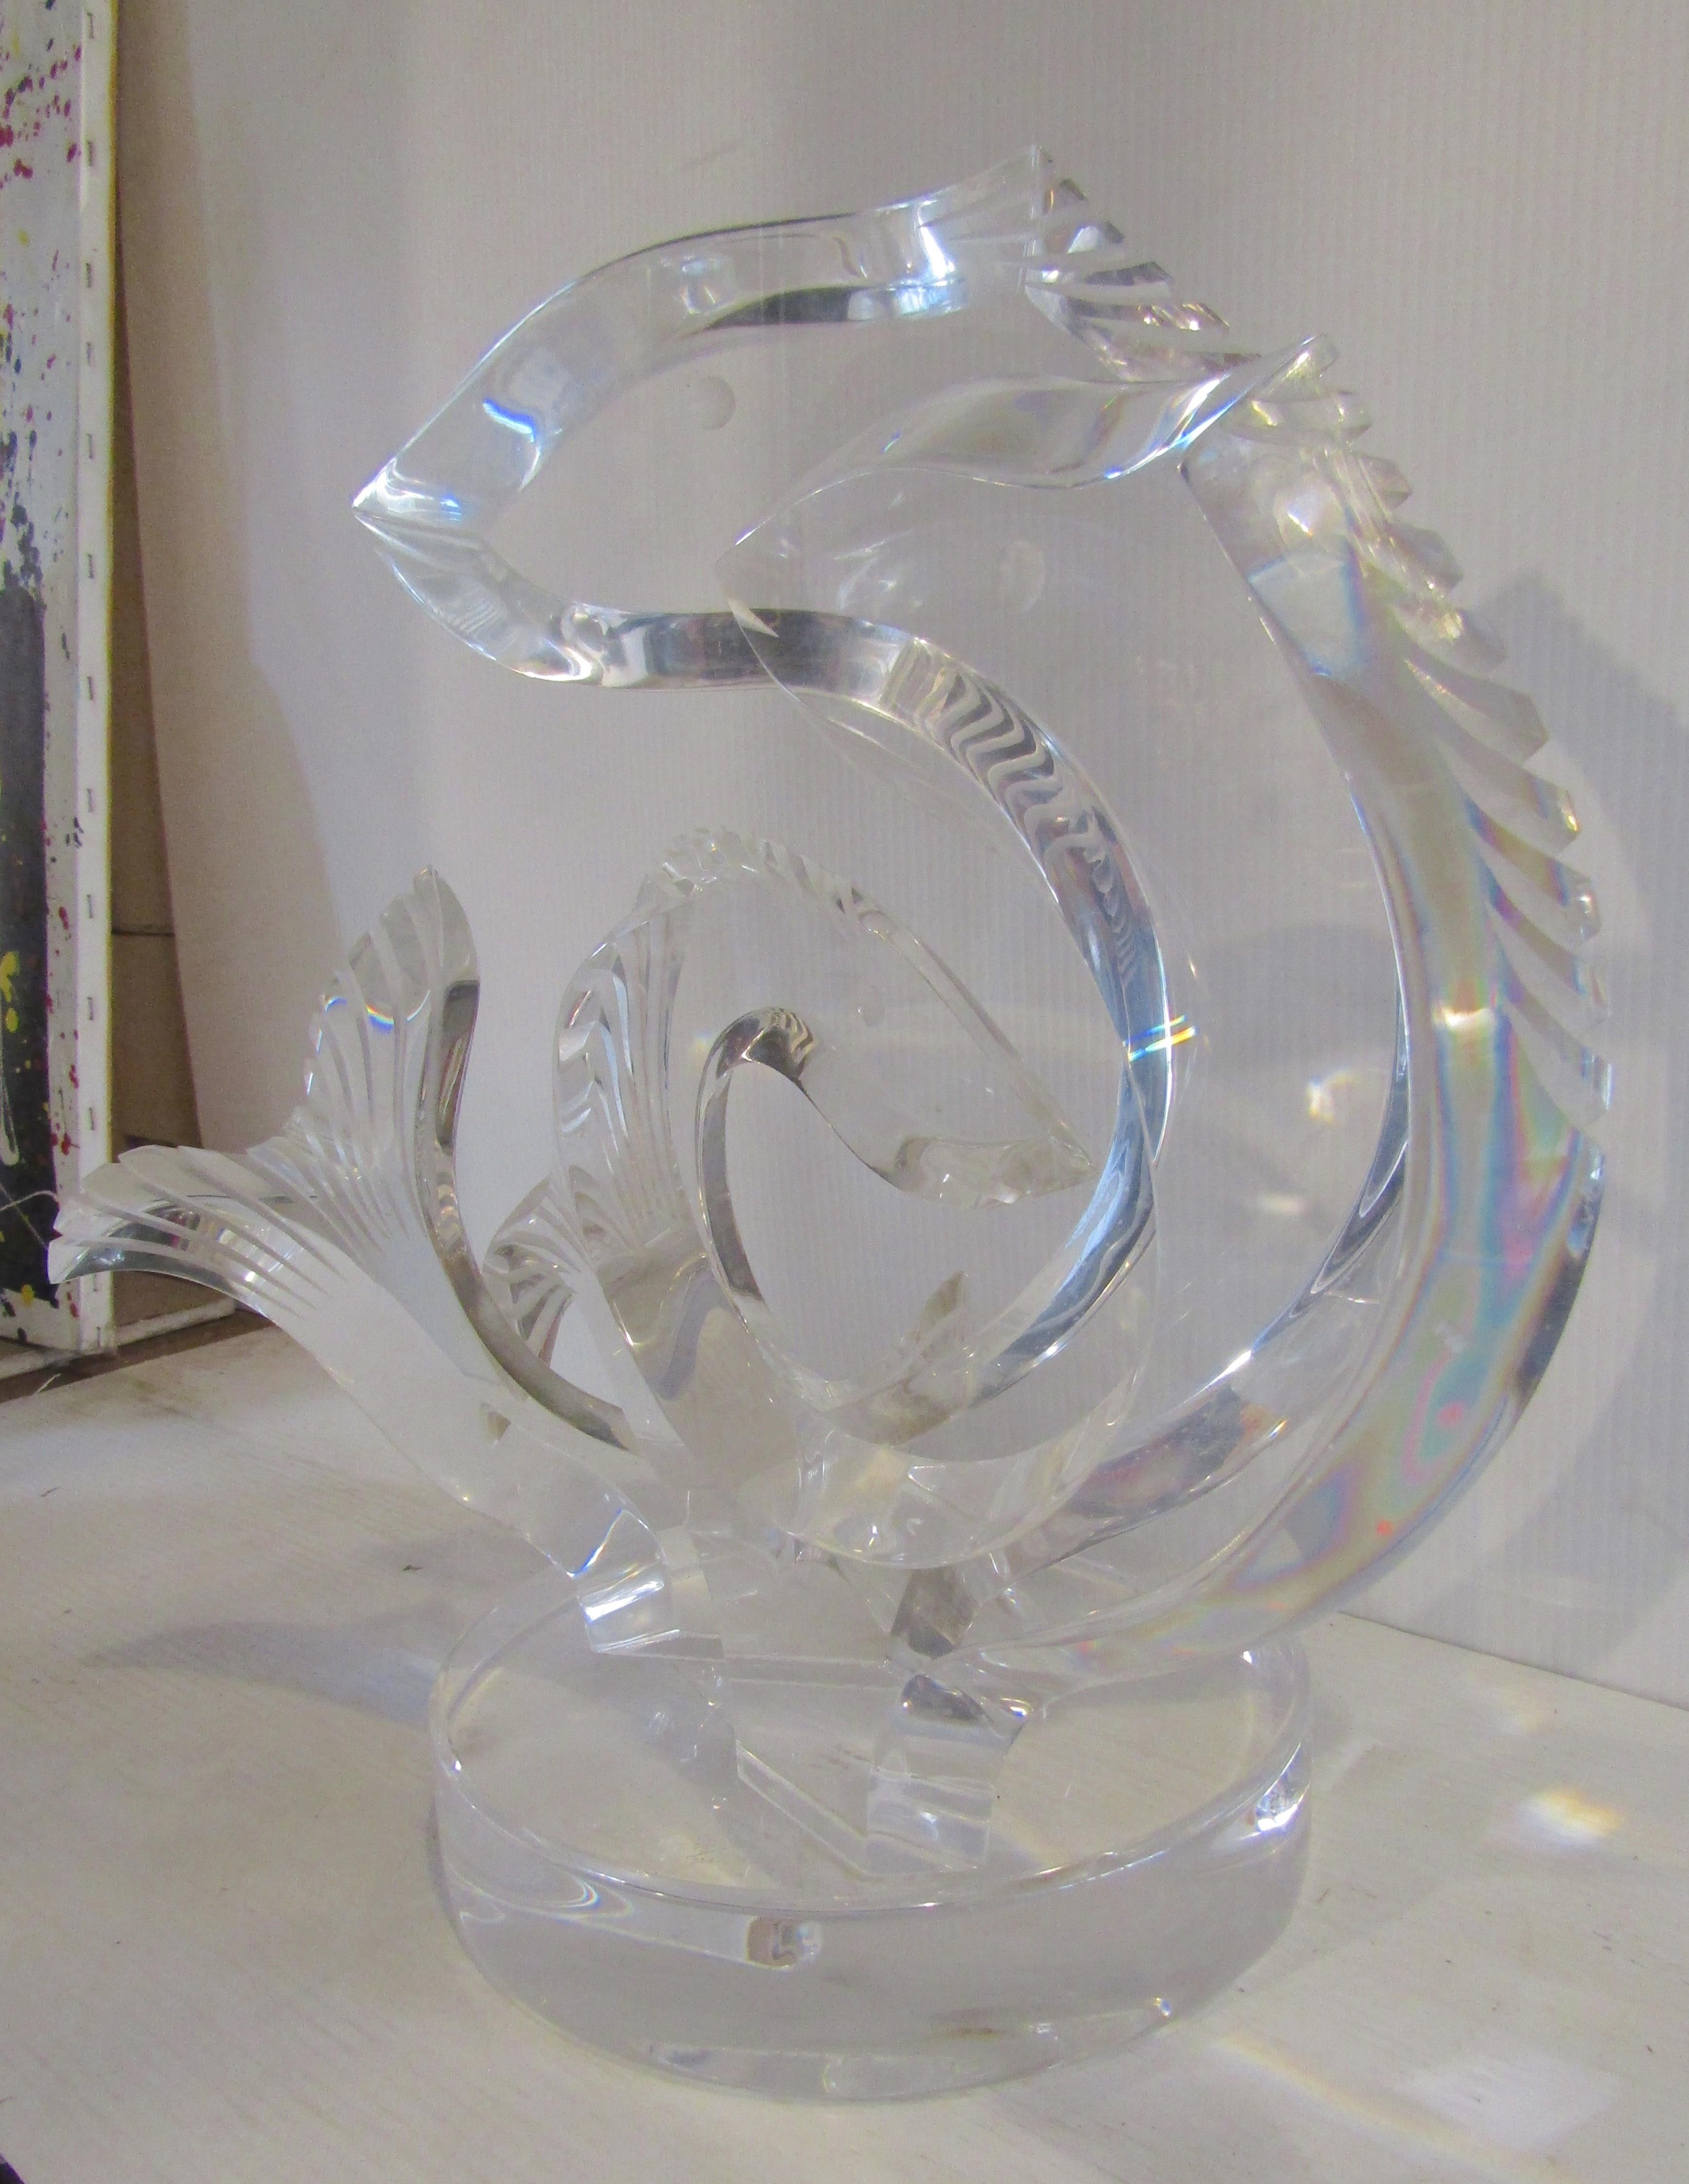 Three fish sculpture made of Lucite by Hivo Van Teal. Signed and numbered.
(Please confirm item location - NY or NJ - with dealer).
      